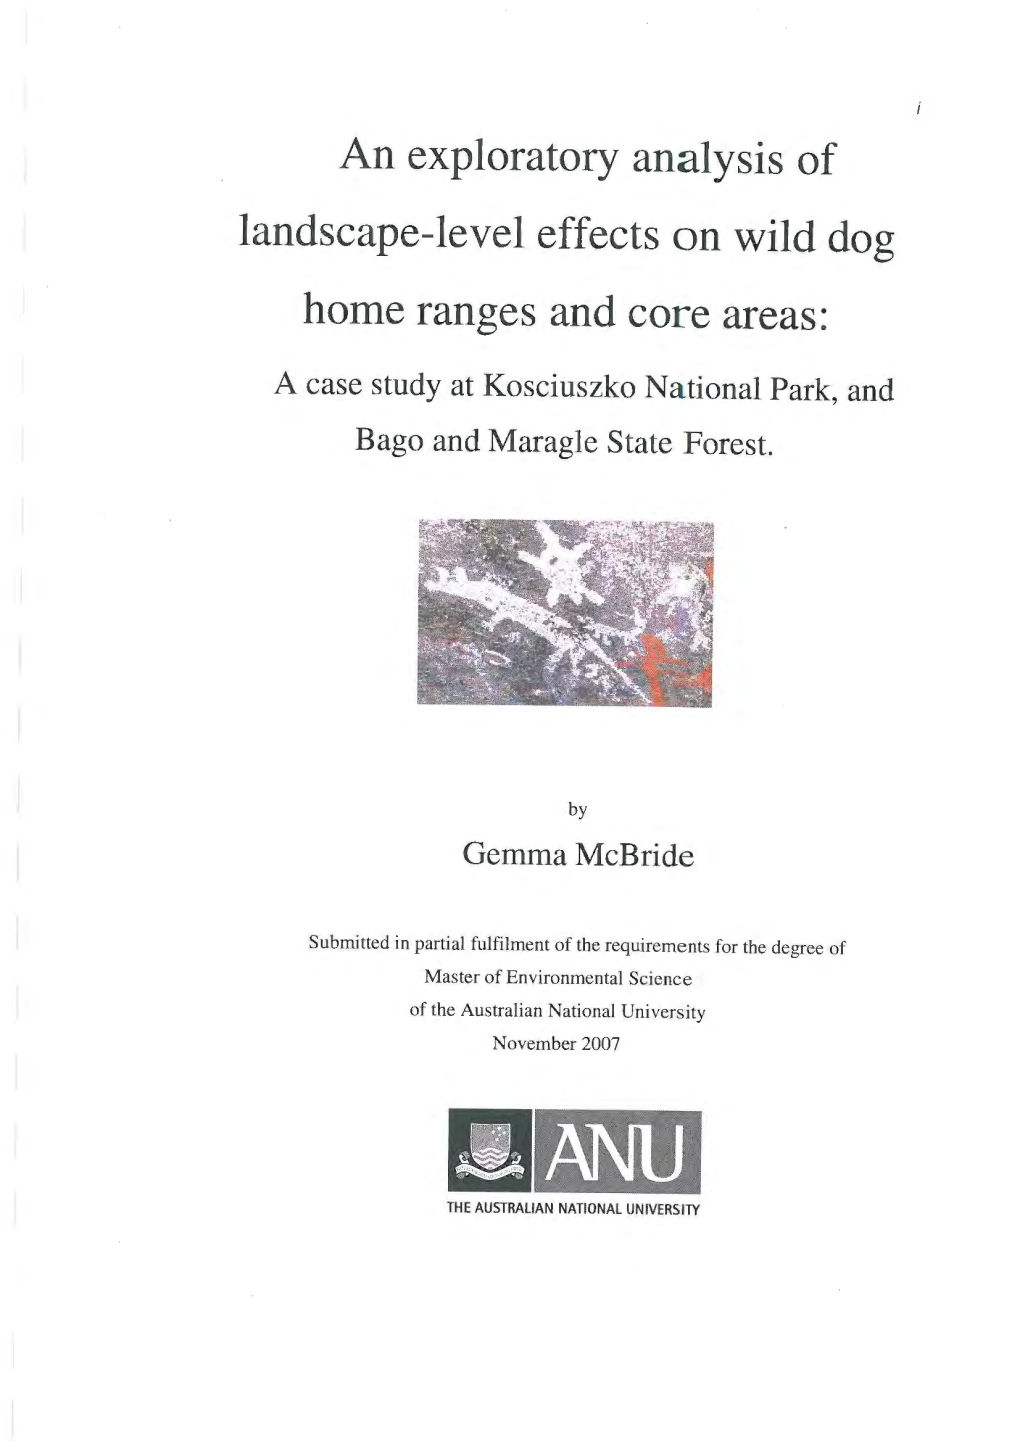 An Exploratory Analysis of Landscape-Level Effects on Wild Dog Home Ranges and Core Areas